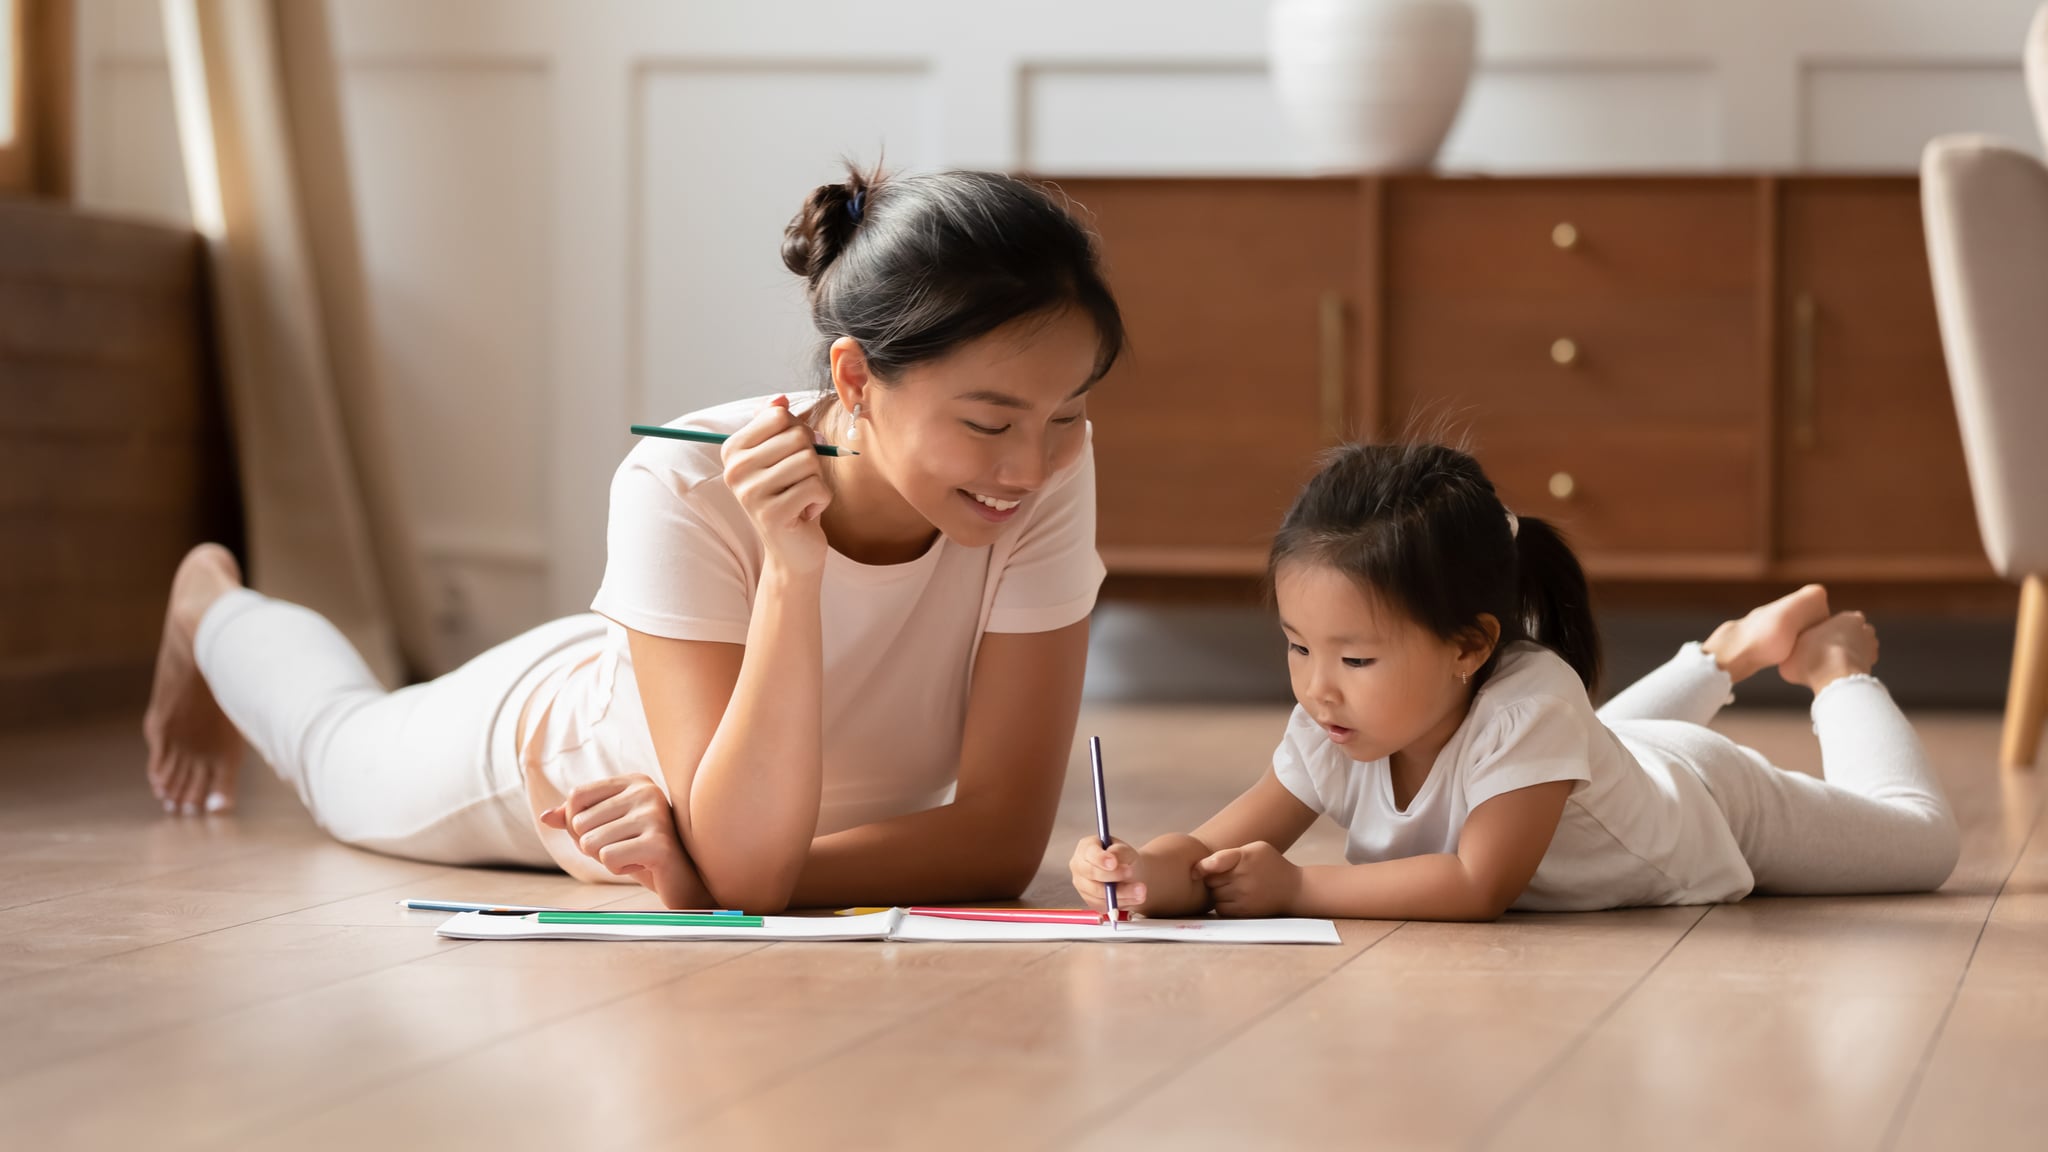 Happy young Asian mother and cute little biracial daughter lying on warm wooden floor in living room painting together, millennial ethnic mom or nanny relax with small Vietnamese girl child drawing